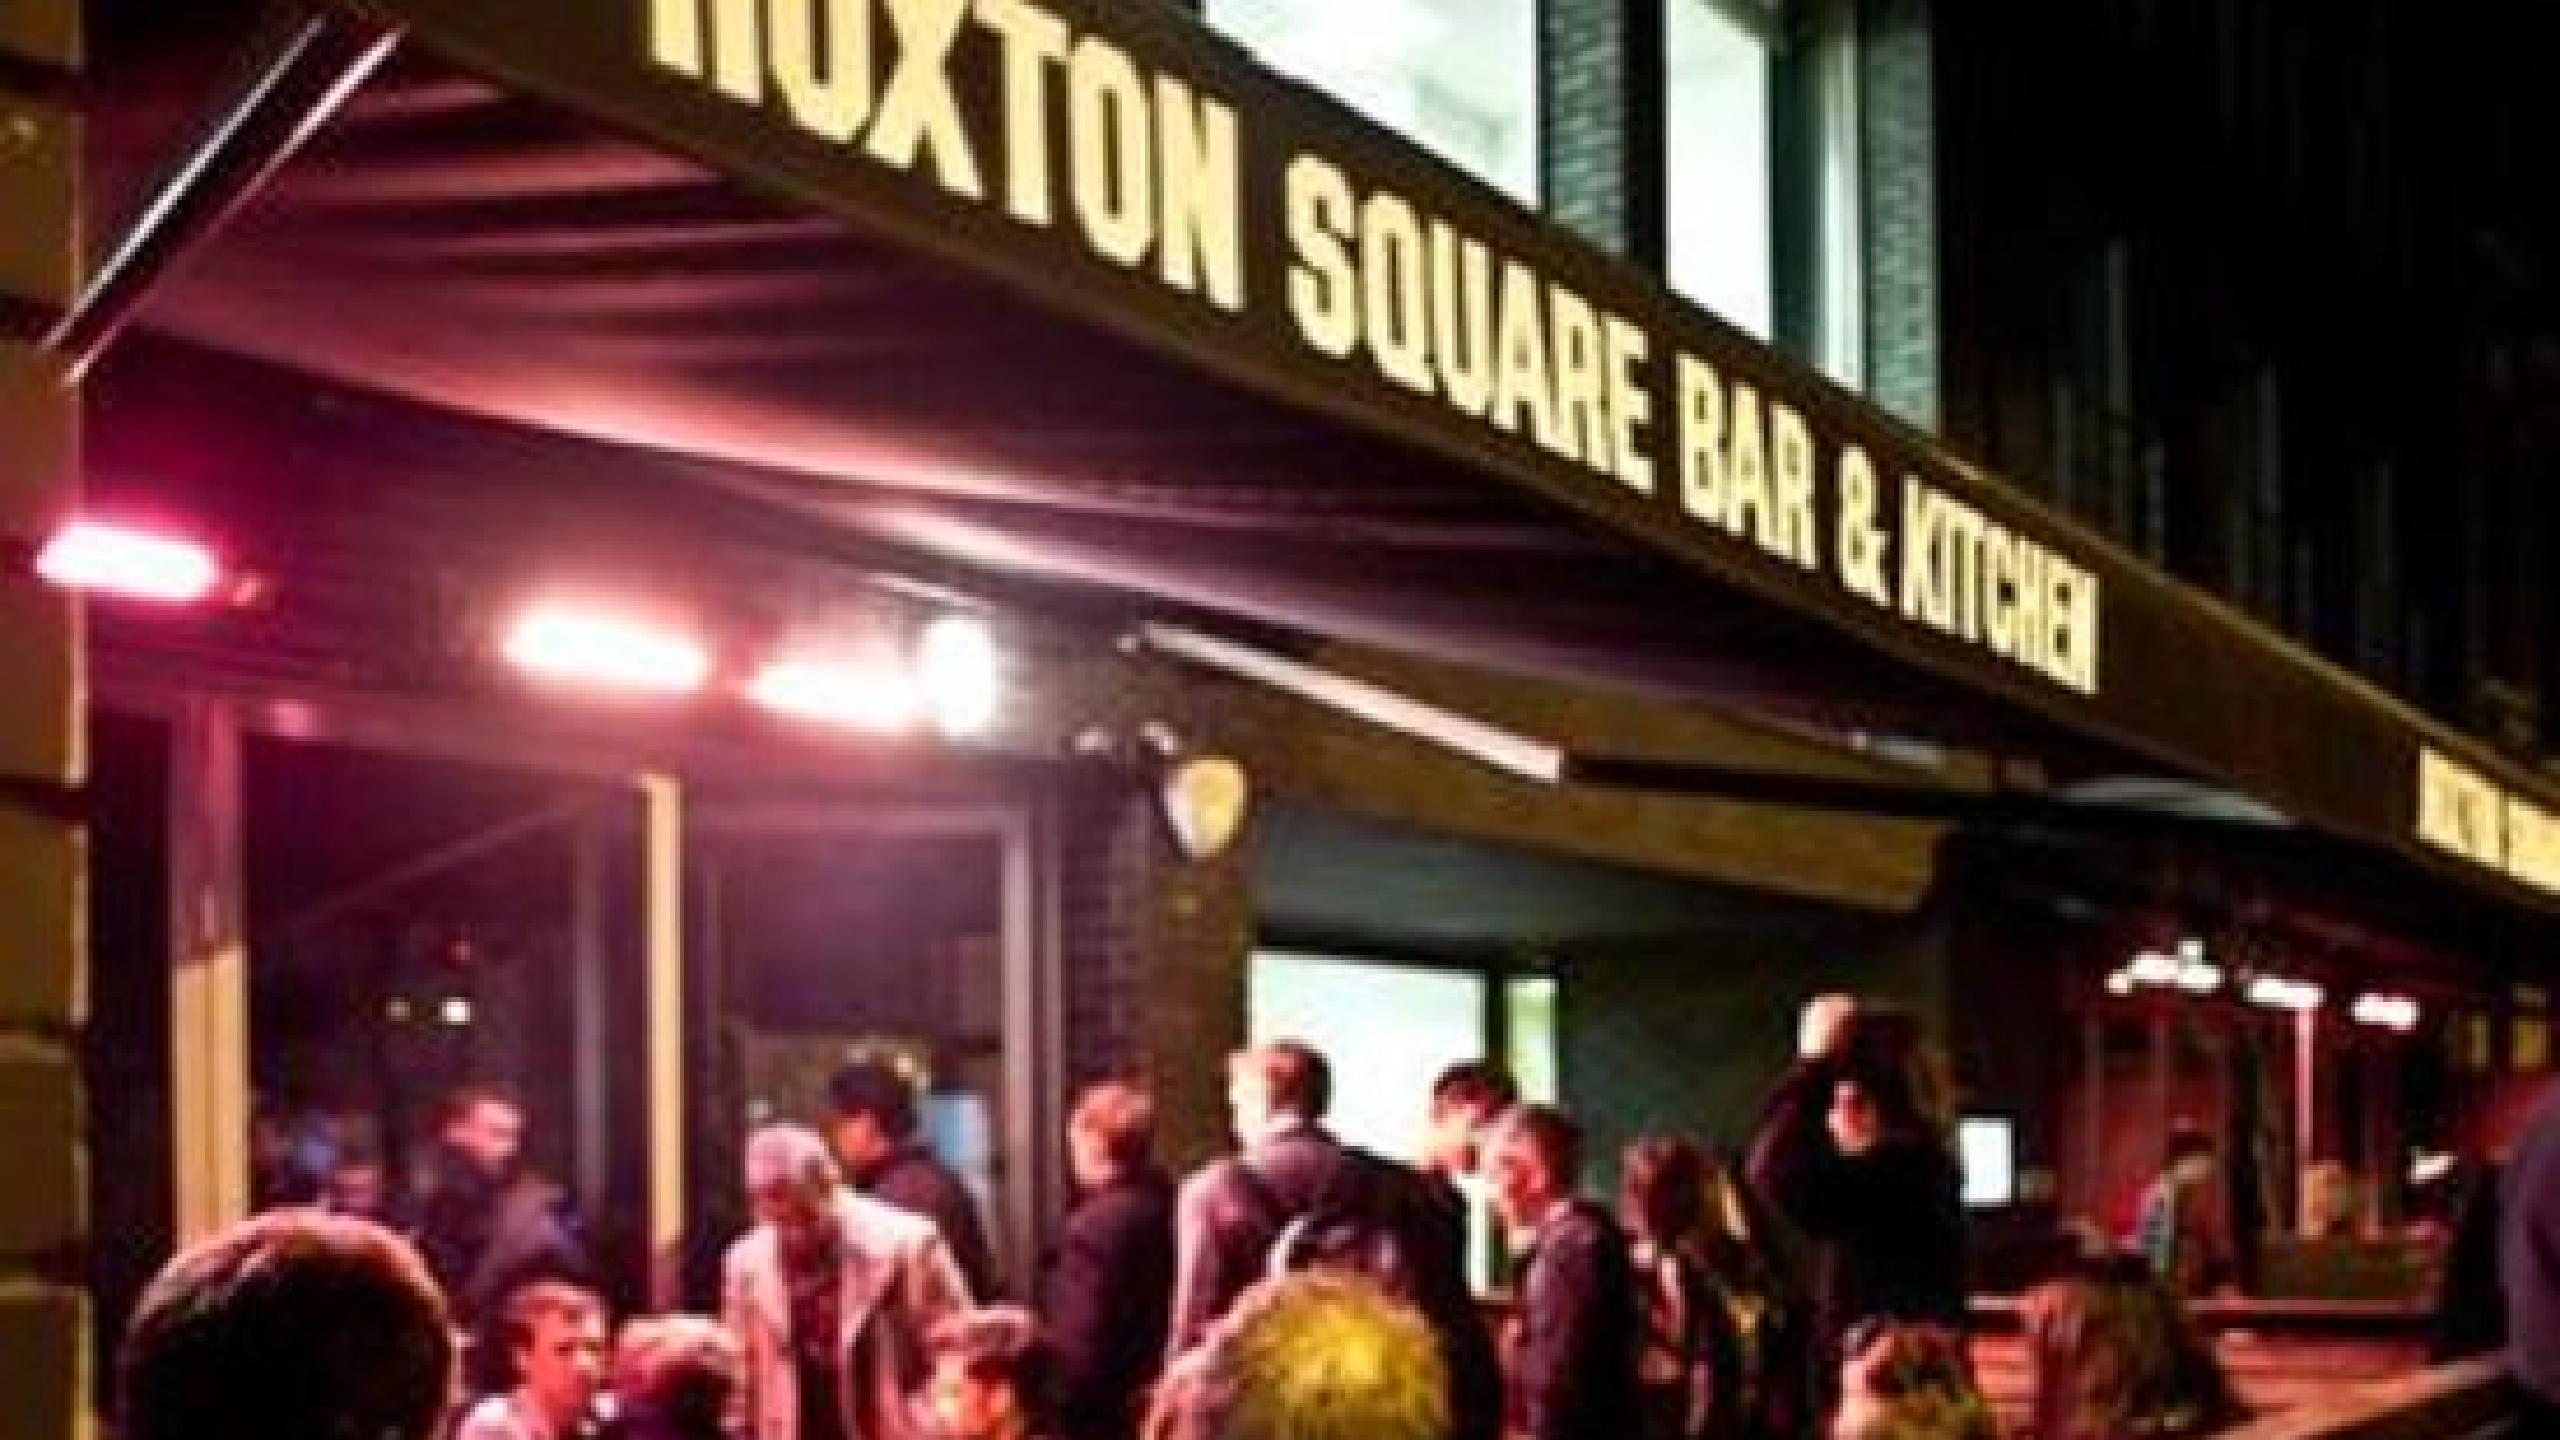 hoxton square bar and kitchen twitter